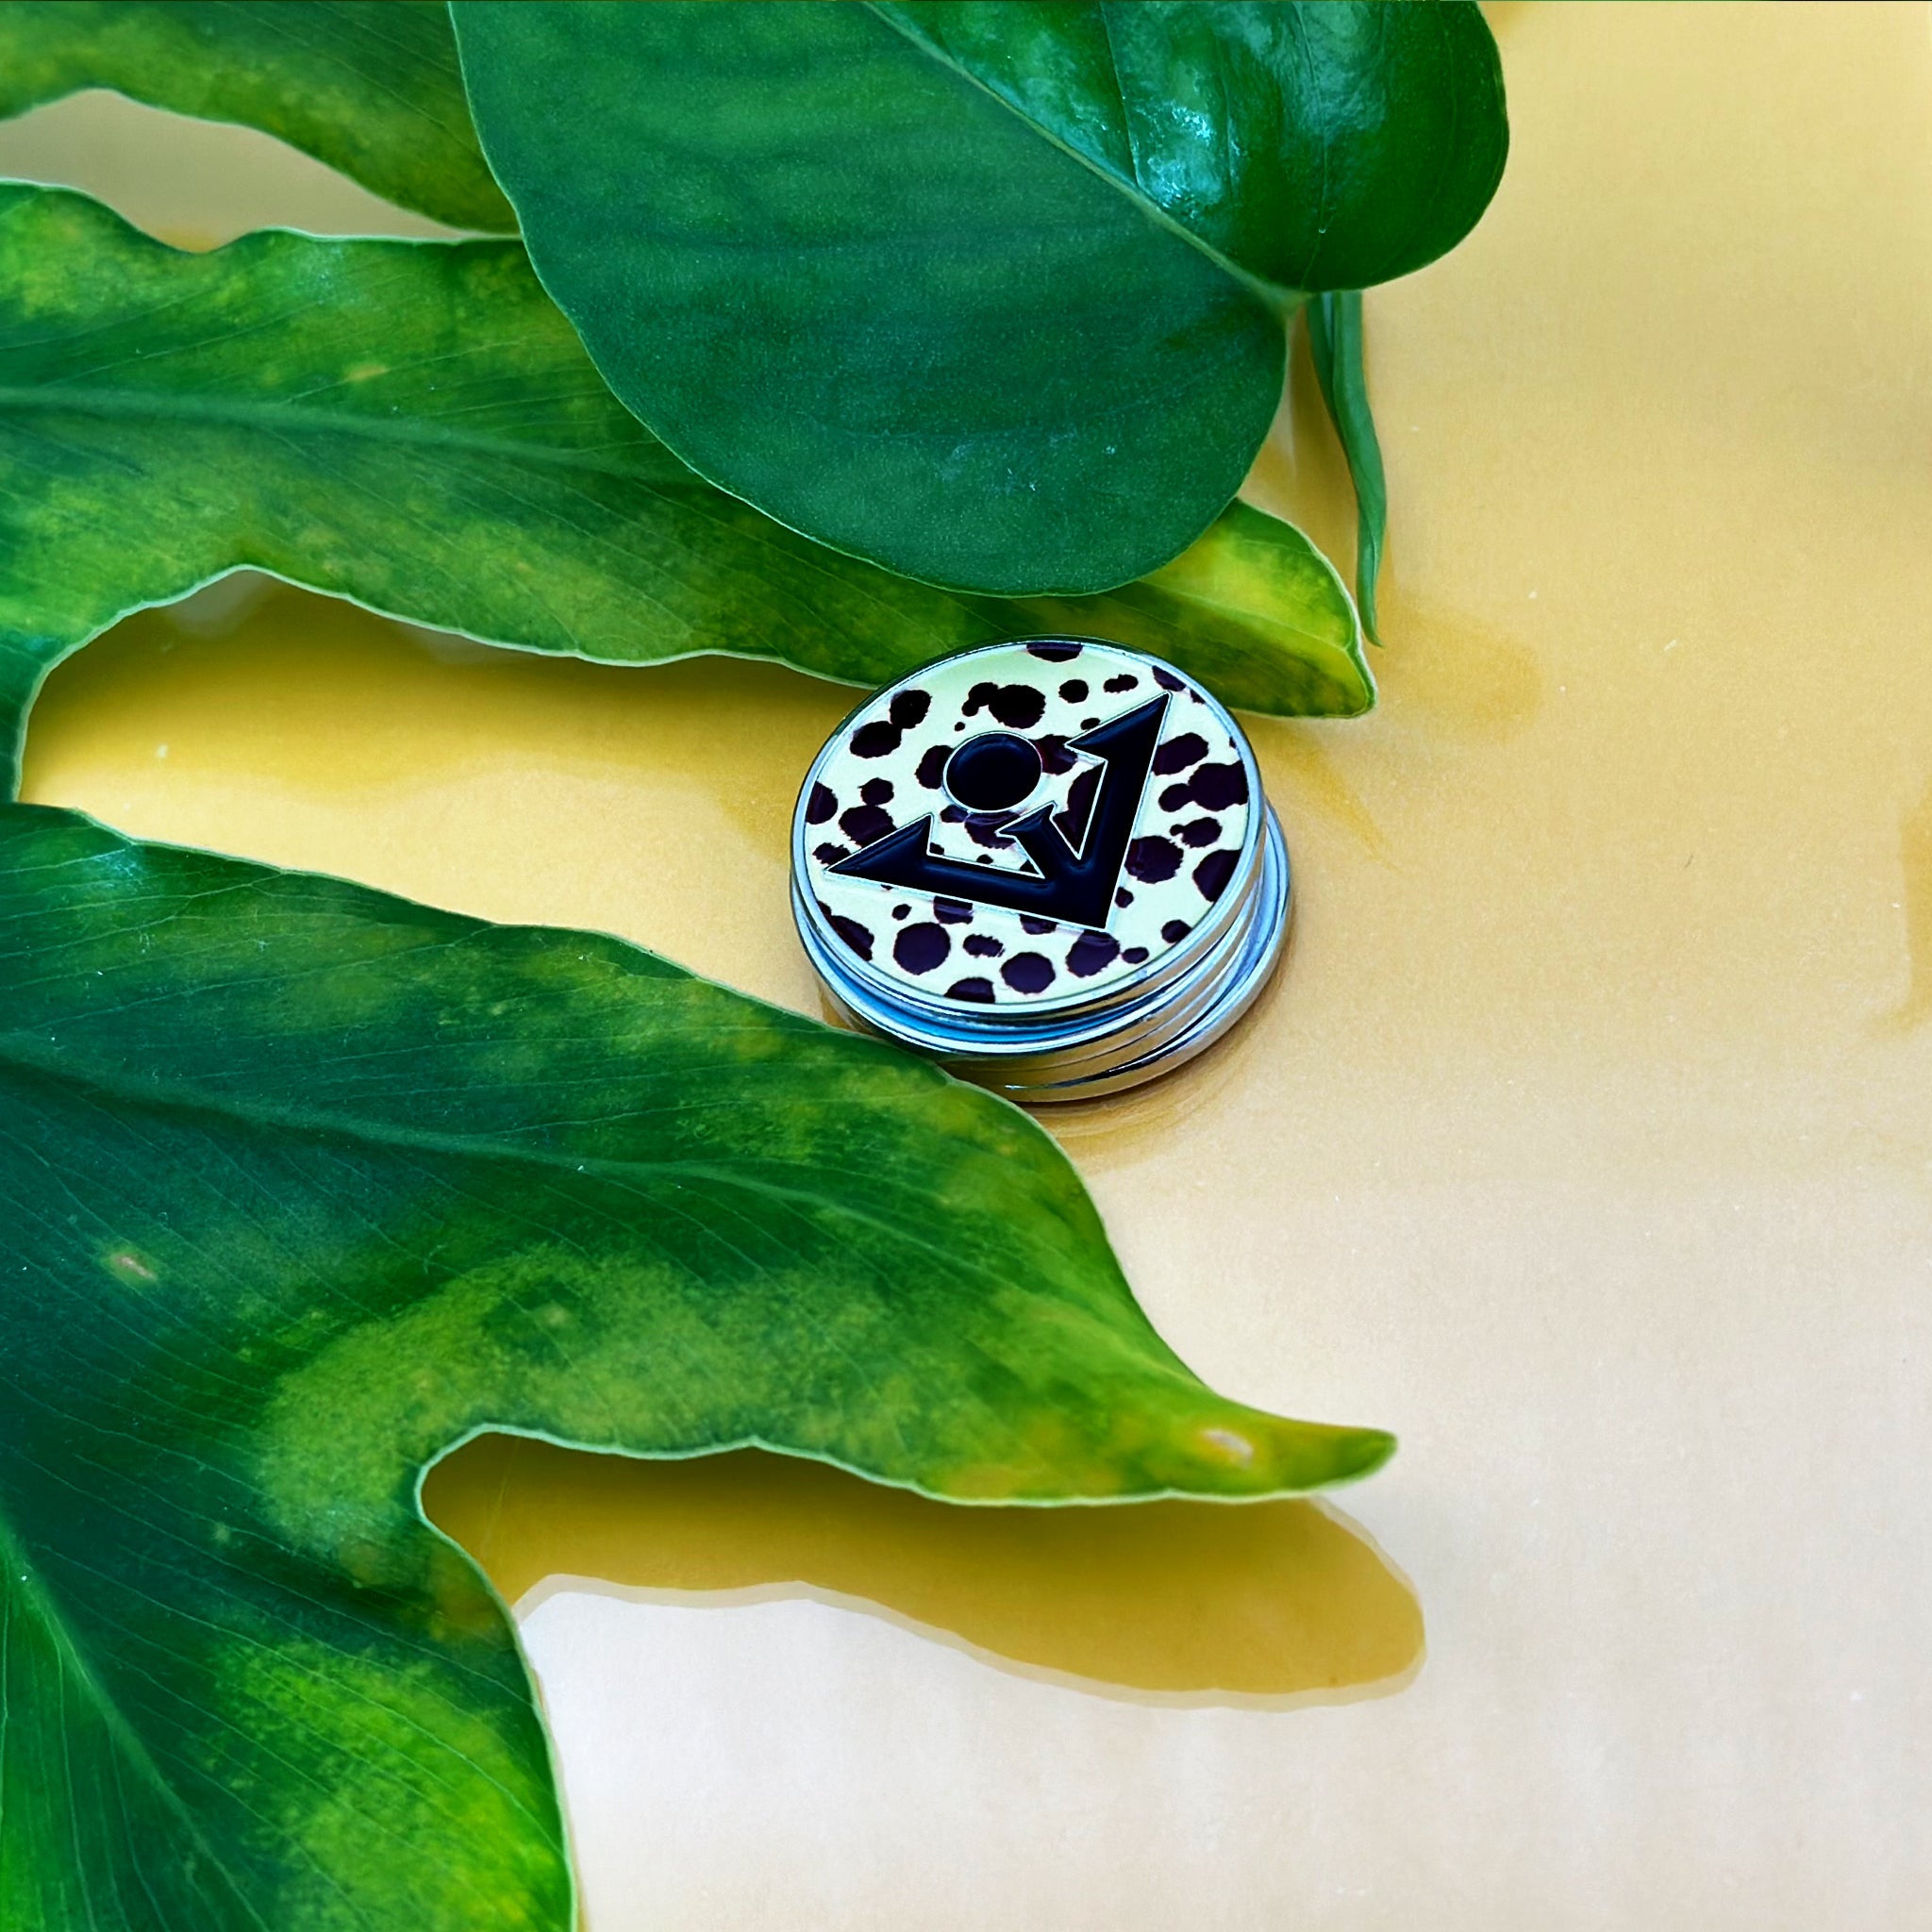 Cheetah print magnetic golf ball marker with leaves and gold backdrop.